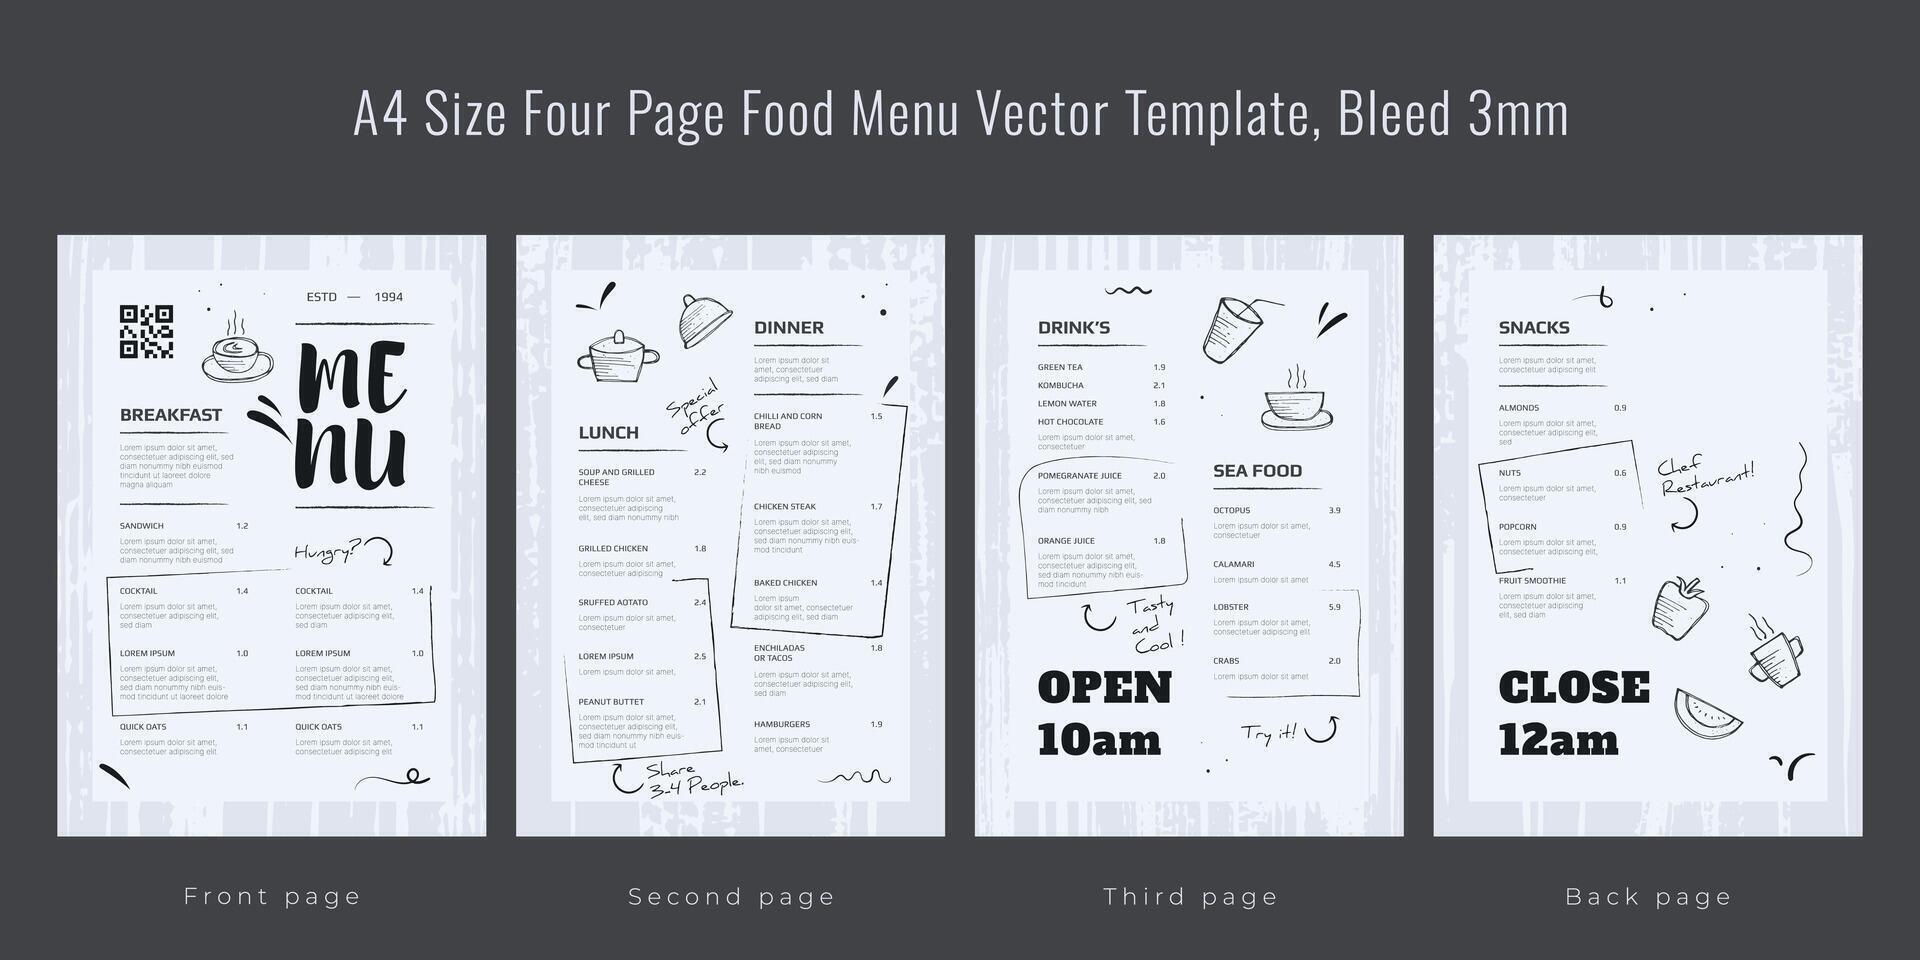 Restaurant cafe menu, template design, A4 size four page food menu template, Bleed 3mm vector